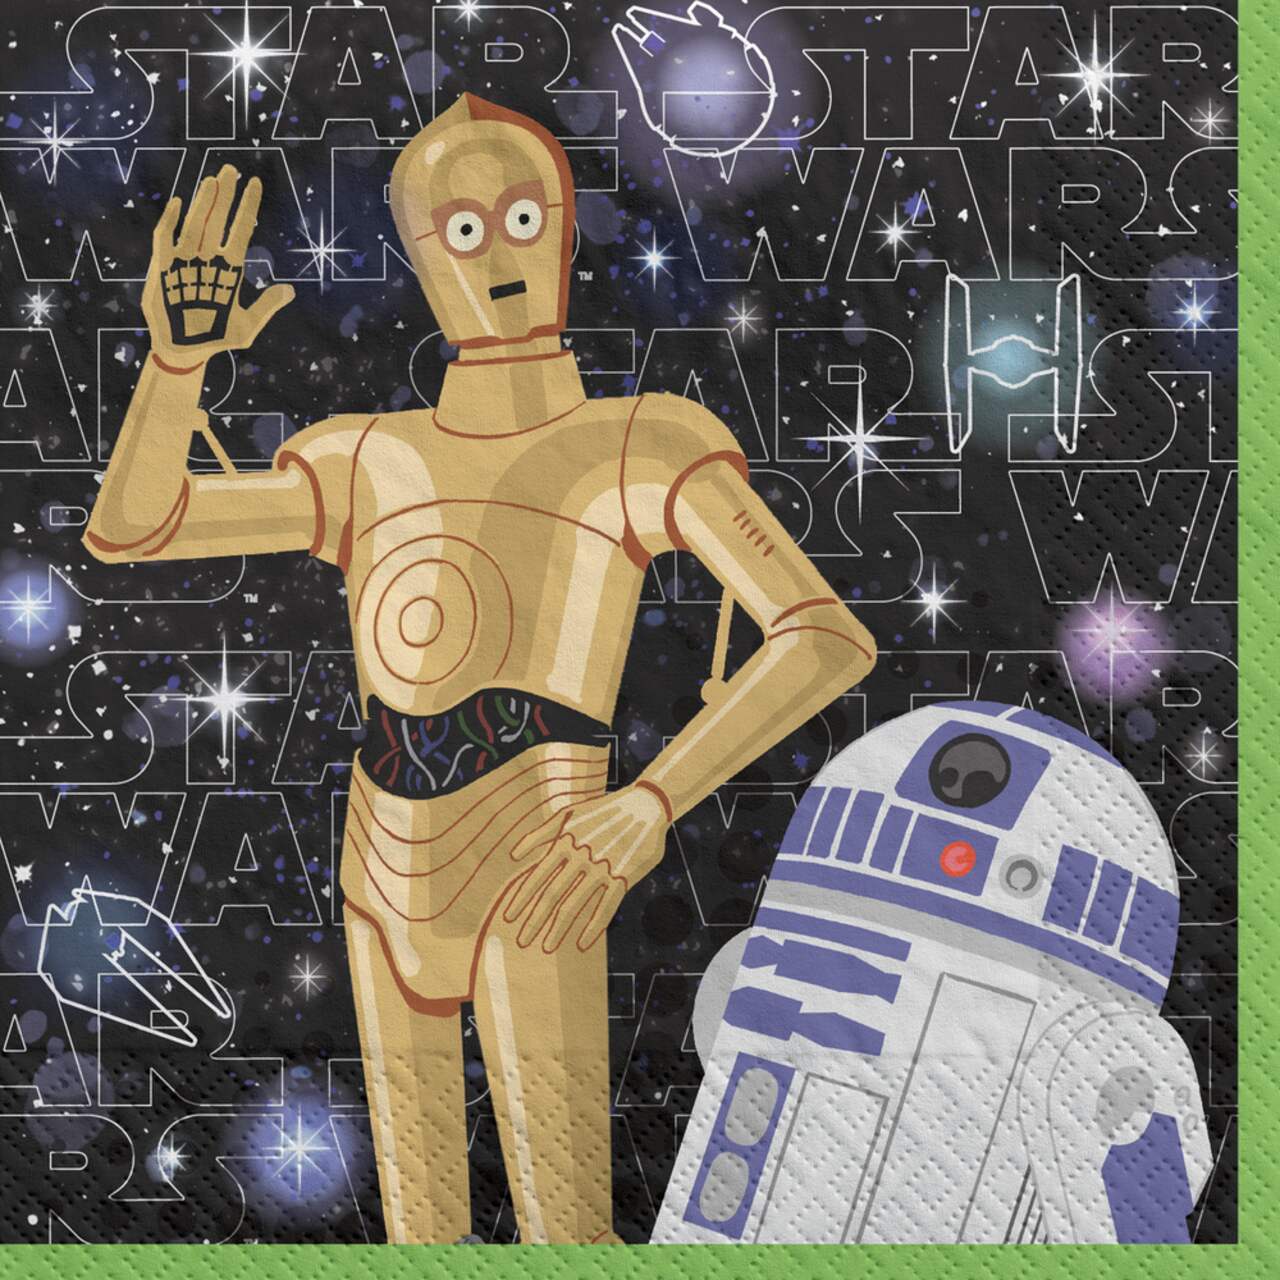 https://media-www.canadiantire.ca/product/seasonal-gardening/party-city-everyday/party-city-party-supplies-decor/8533915/star-wars-galaxy-of-adventures-beverage-napkins-6afb9d1b-e0bf-4baf-bcbe-35b5bab19985.png?imdensity=1&imwidth=640&impolicy=mZoom